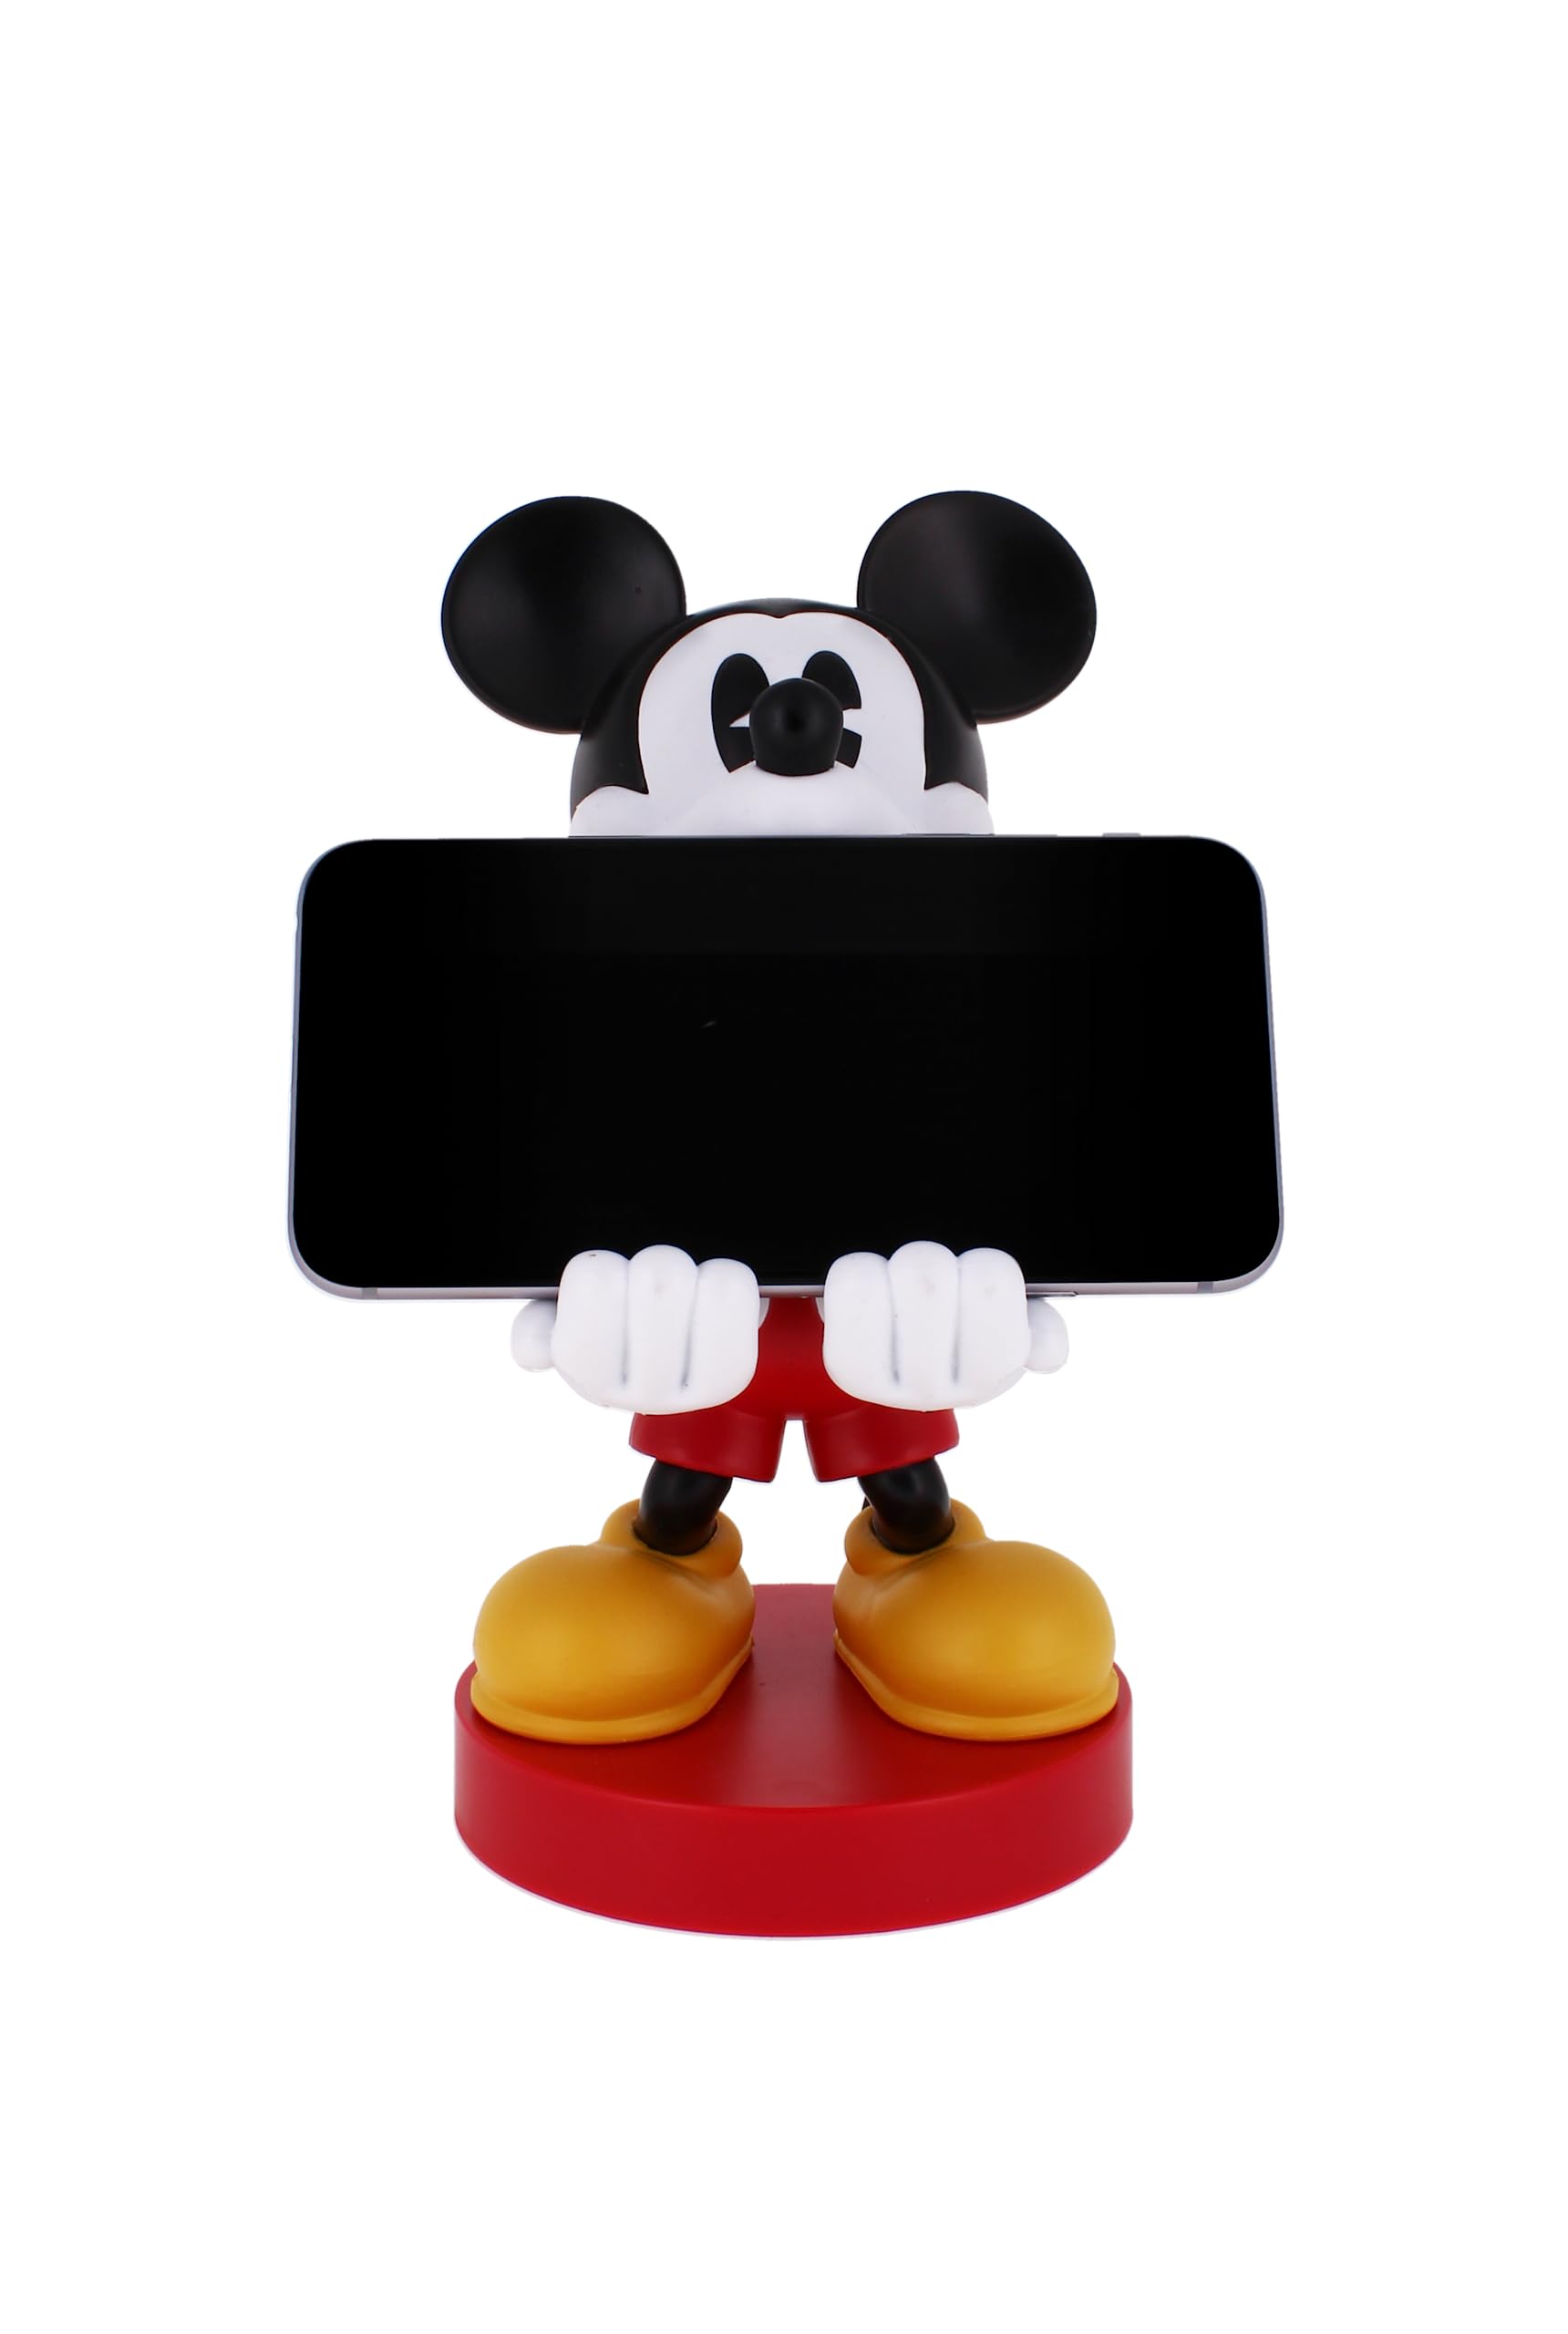 Exquisite Gaming Cable Guys: Disney Mickey Mouse Phone Stand & Controller Holder - Officially Licenced Figure - Exquisite Gaming